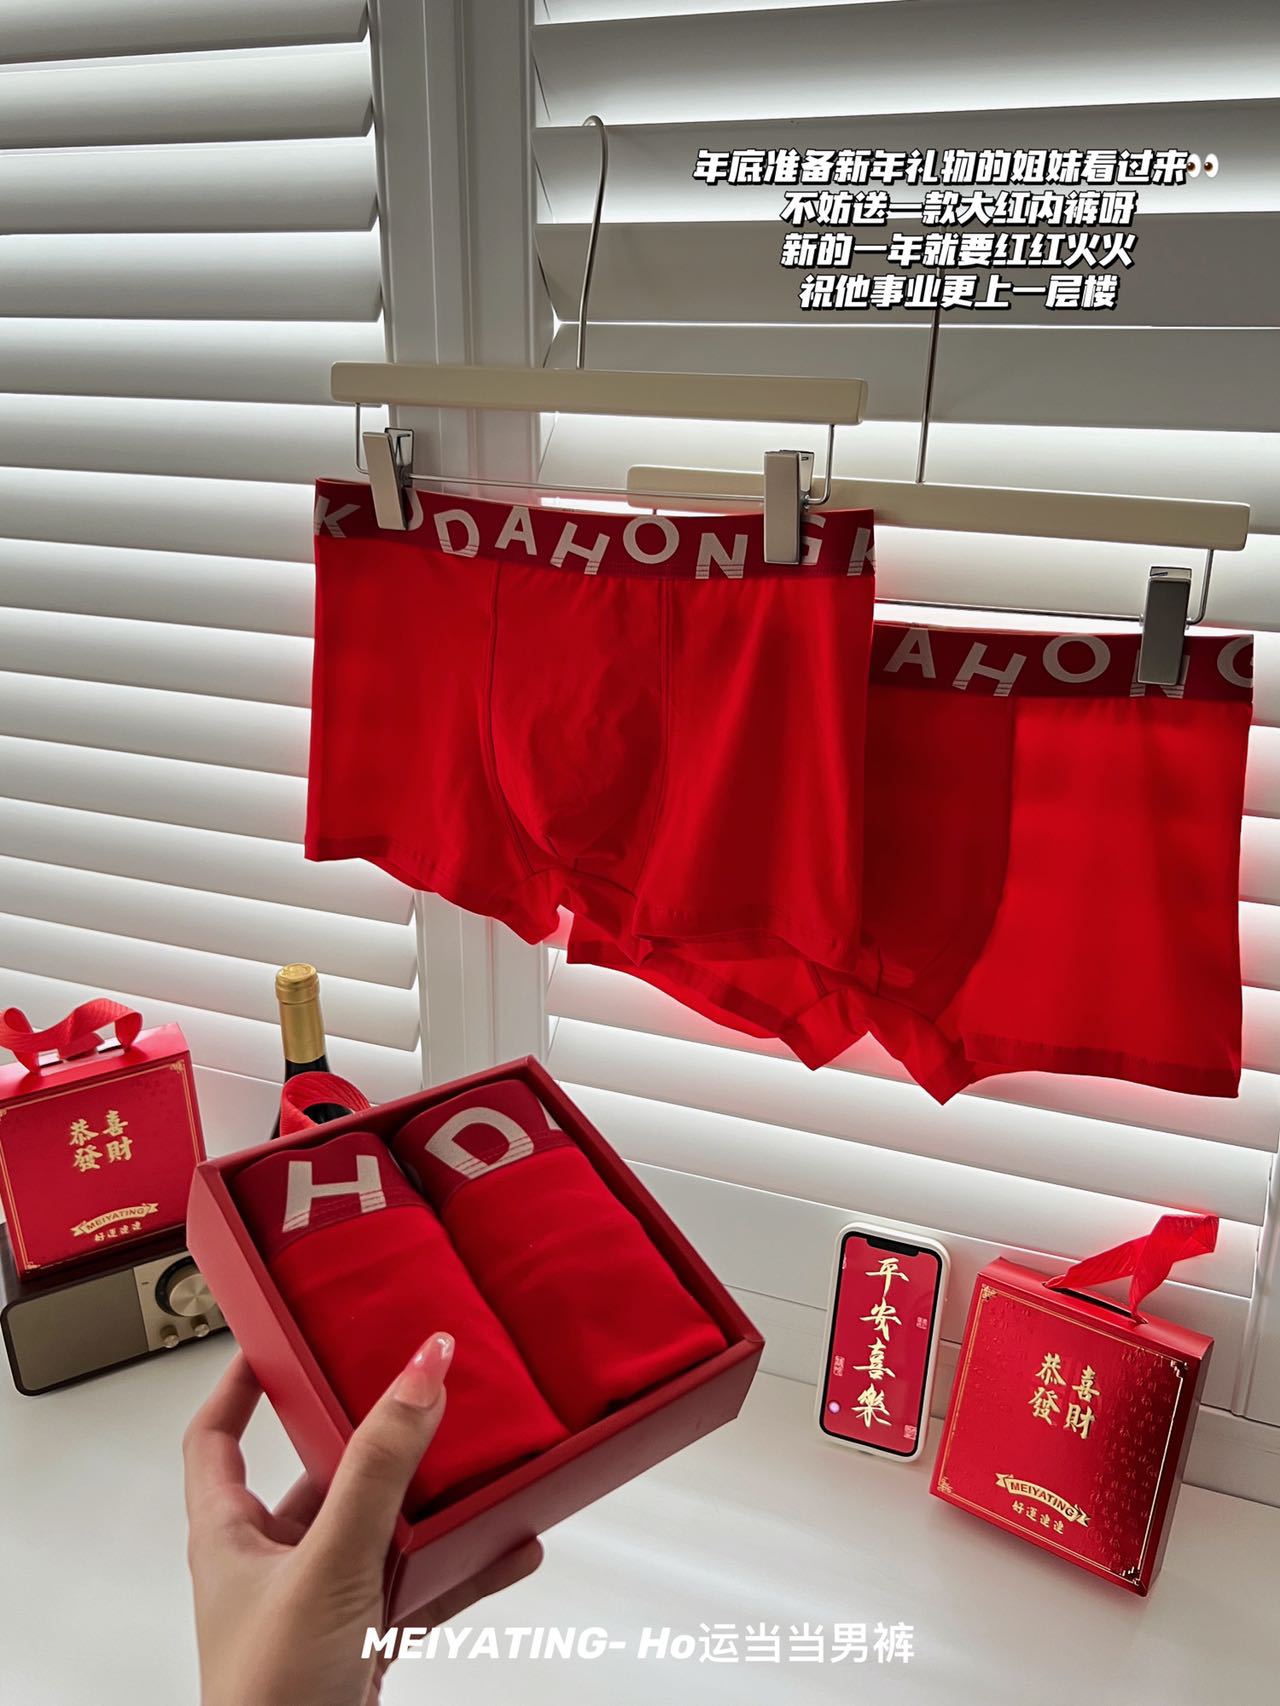 Yundangdang Underwear, Red Contrast Color Letter High Elastic Belt, Comfortable and Breathable Men's Boxers Boxed